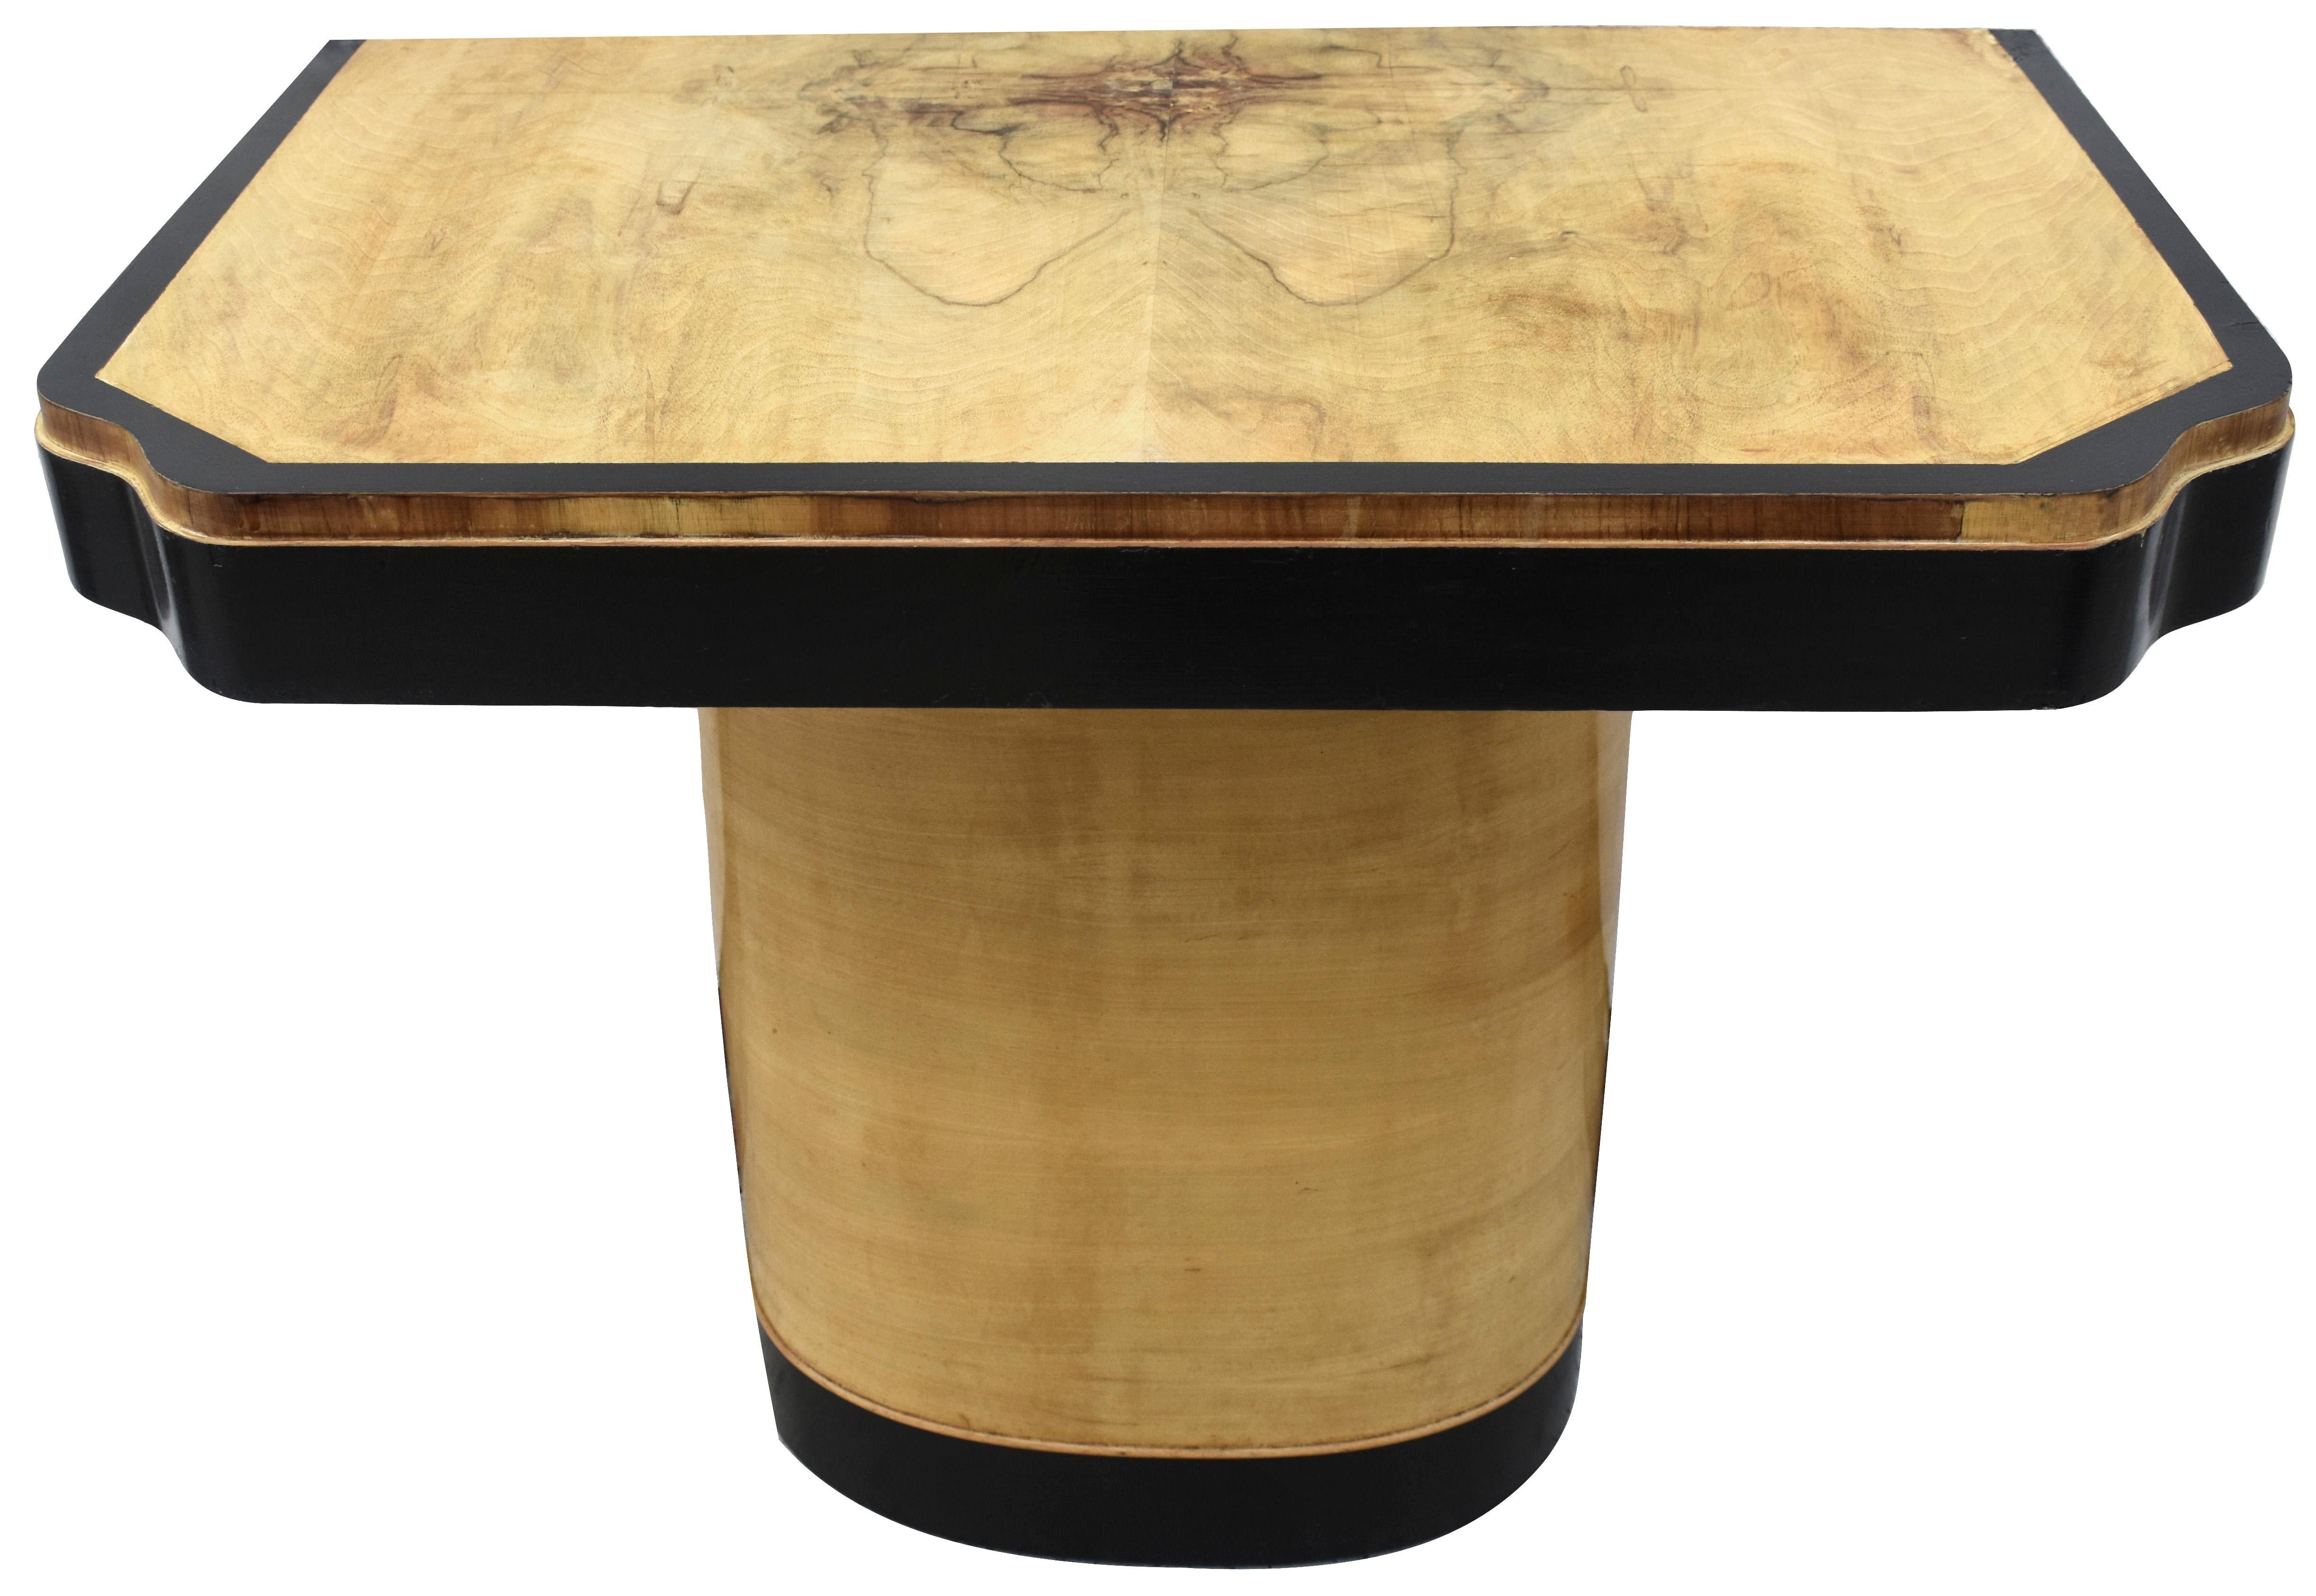 For your consideration are these matching pair of Console/side tables in a true blonde walnut veneer with ebonized banding. Originating from England and dating to the 1930's, very rare to find a matching pair. Great height and overall table size for